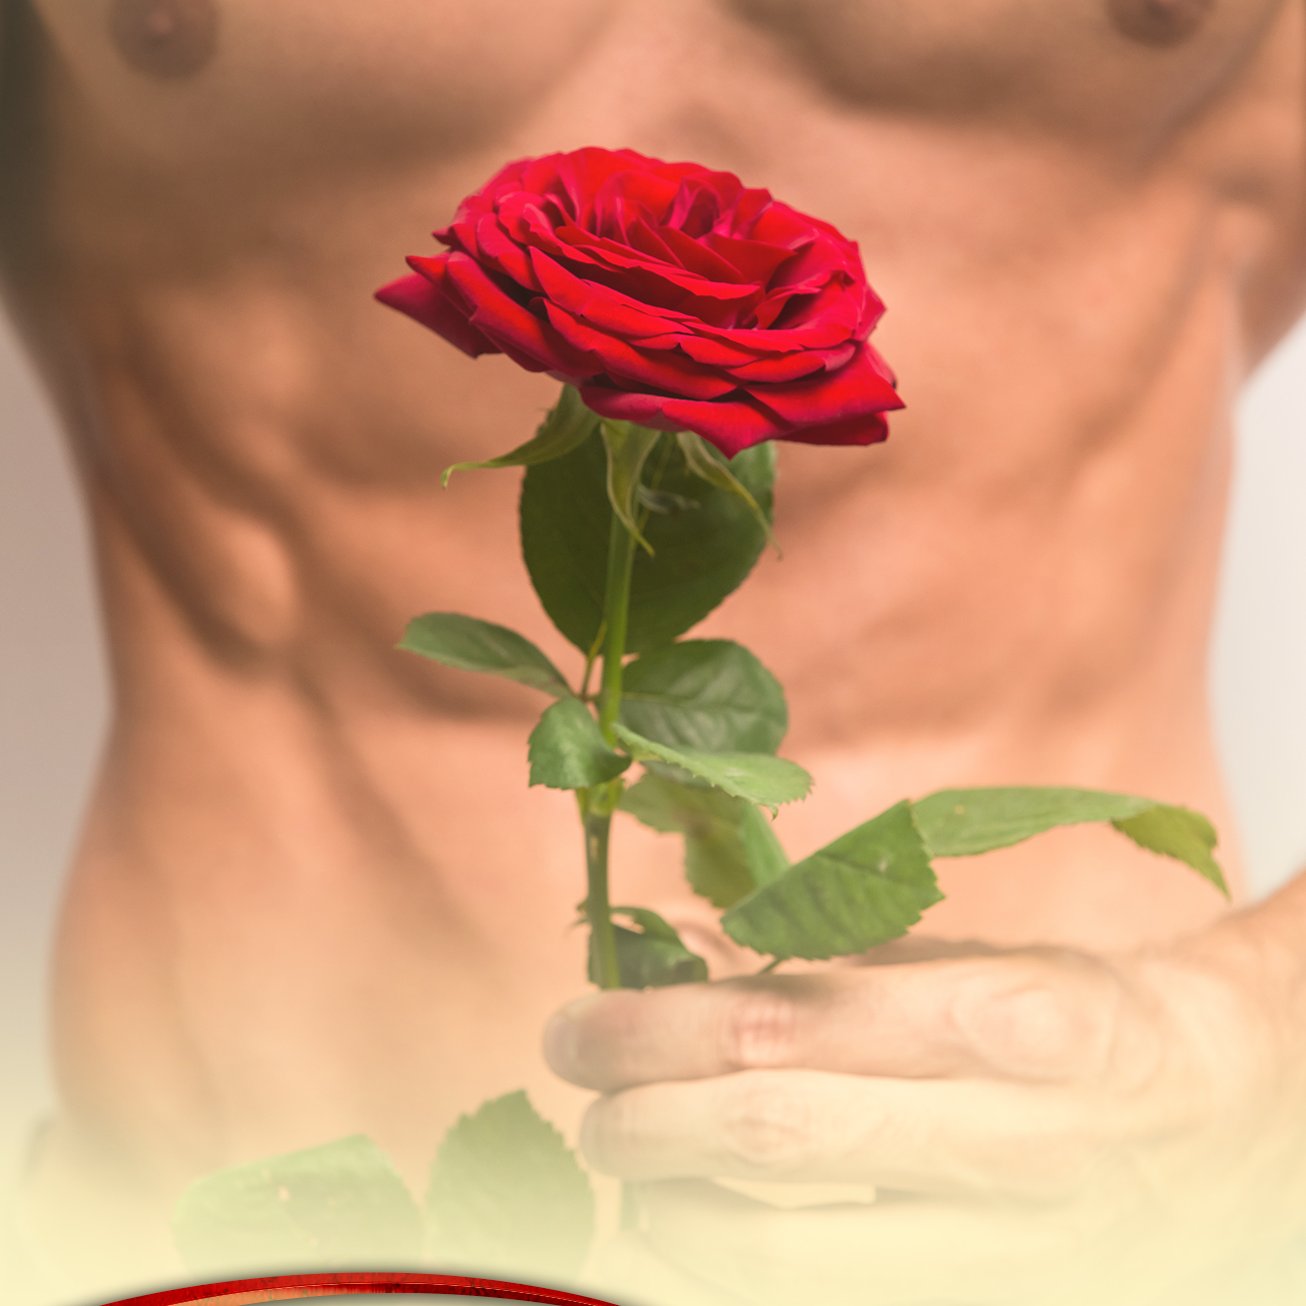 Sharing free (or on free promo) romance and erotica stories.

Readers: Read, review, and enjoy.
Authors: https://t.co/U61bDs6h3i